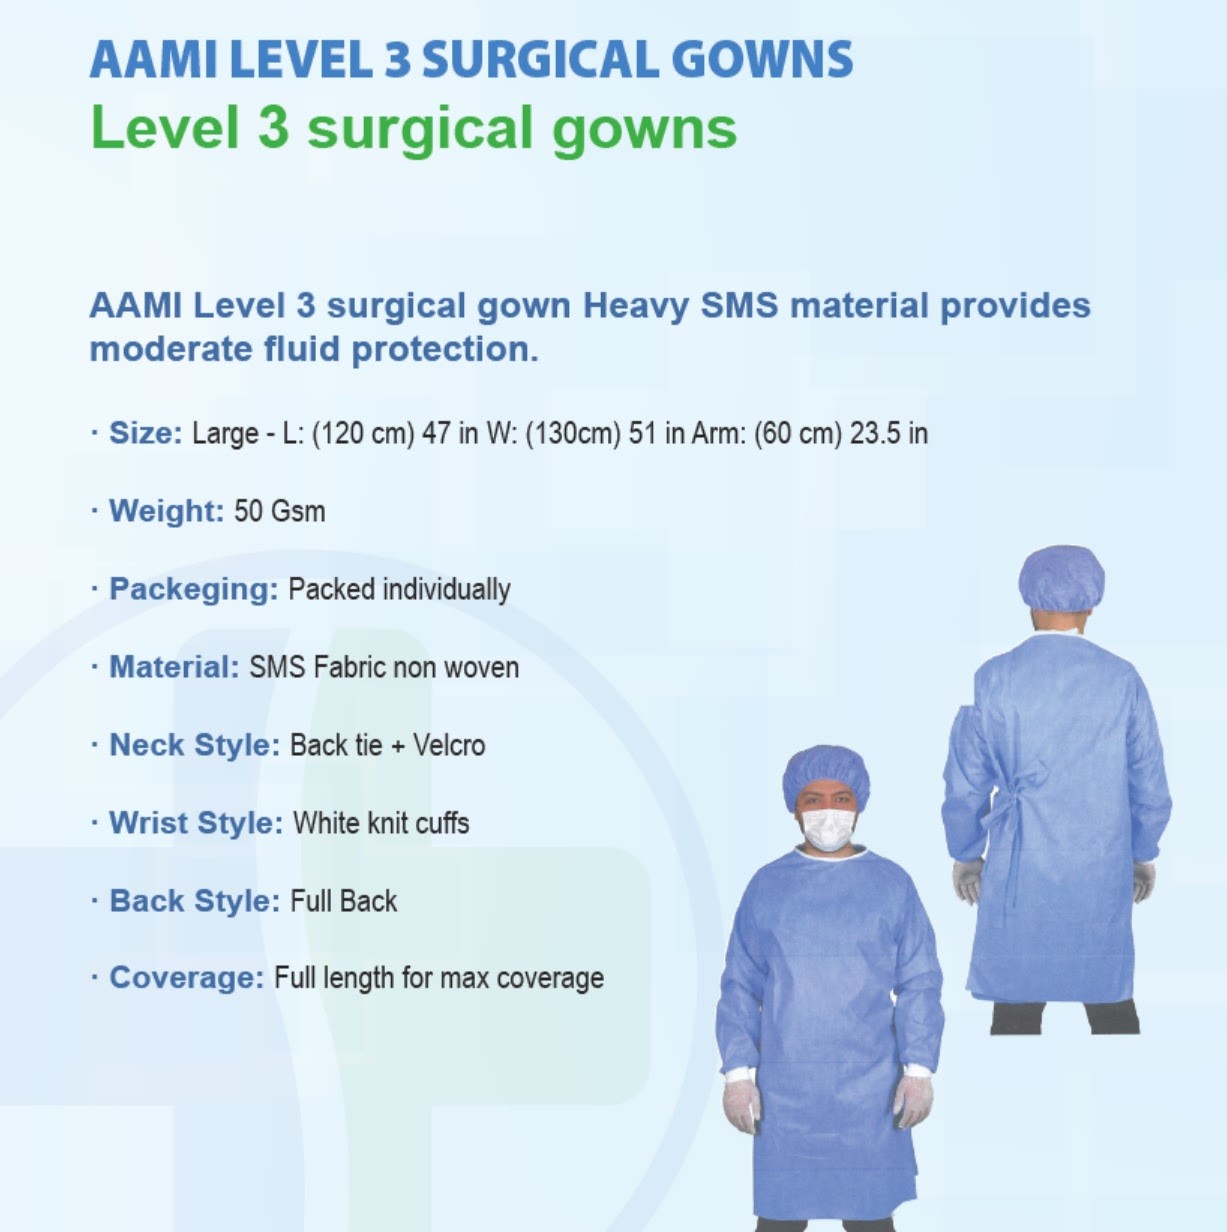 STERILE SURGICAL GOWNS - AAMI LEVEL 3 - MOQ ORDERS ACCEPTED - { 500,000 QTY } - F.O.B. NJ USA